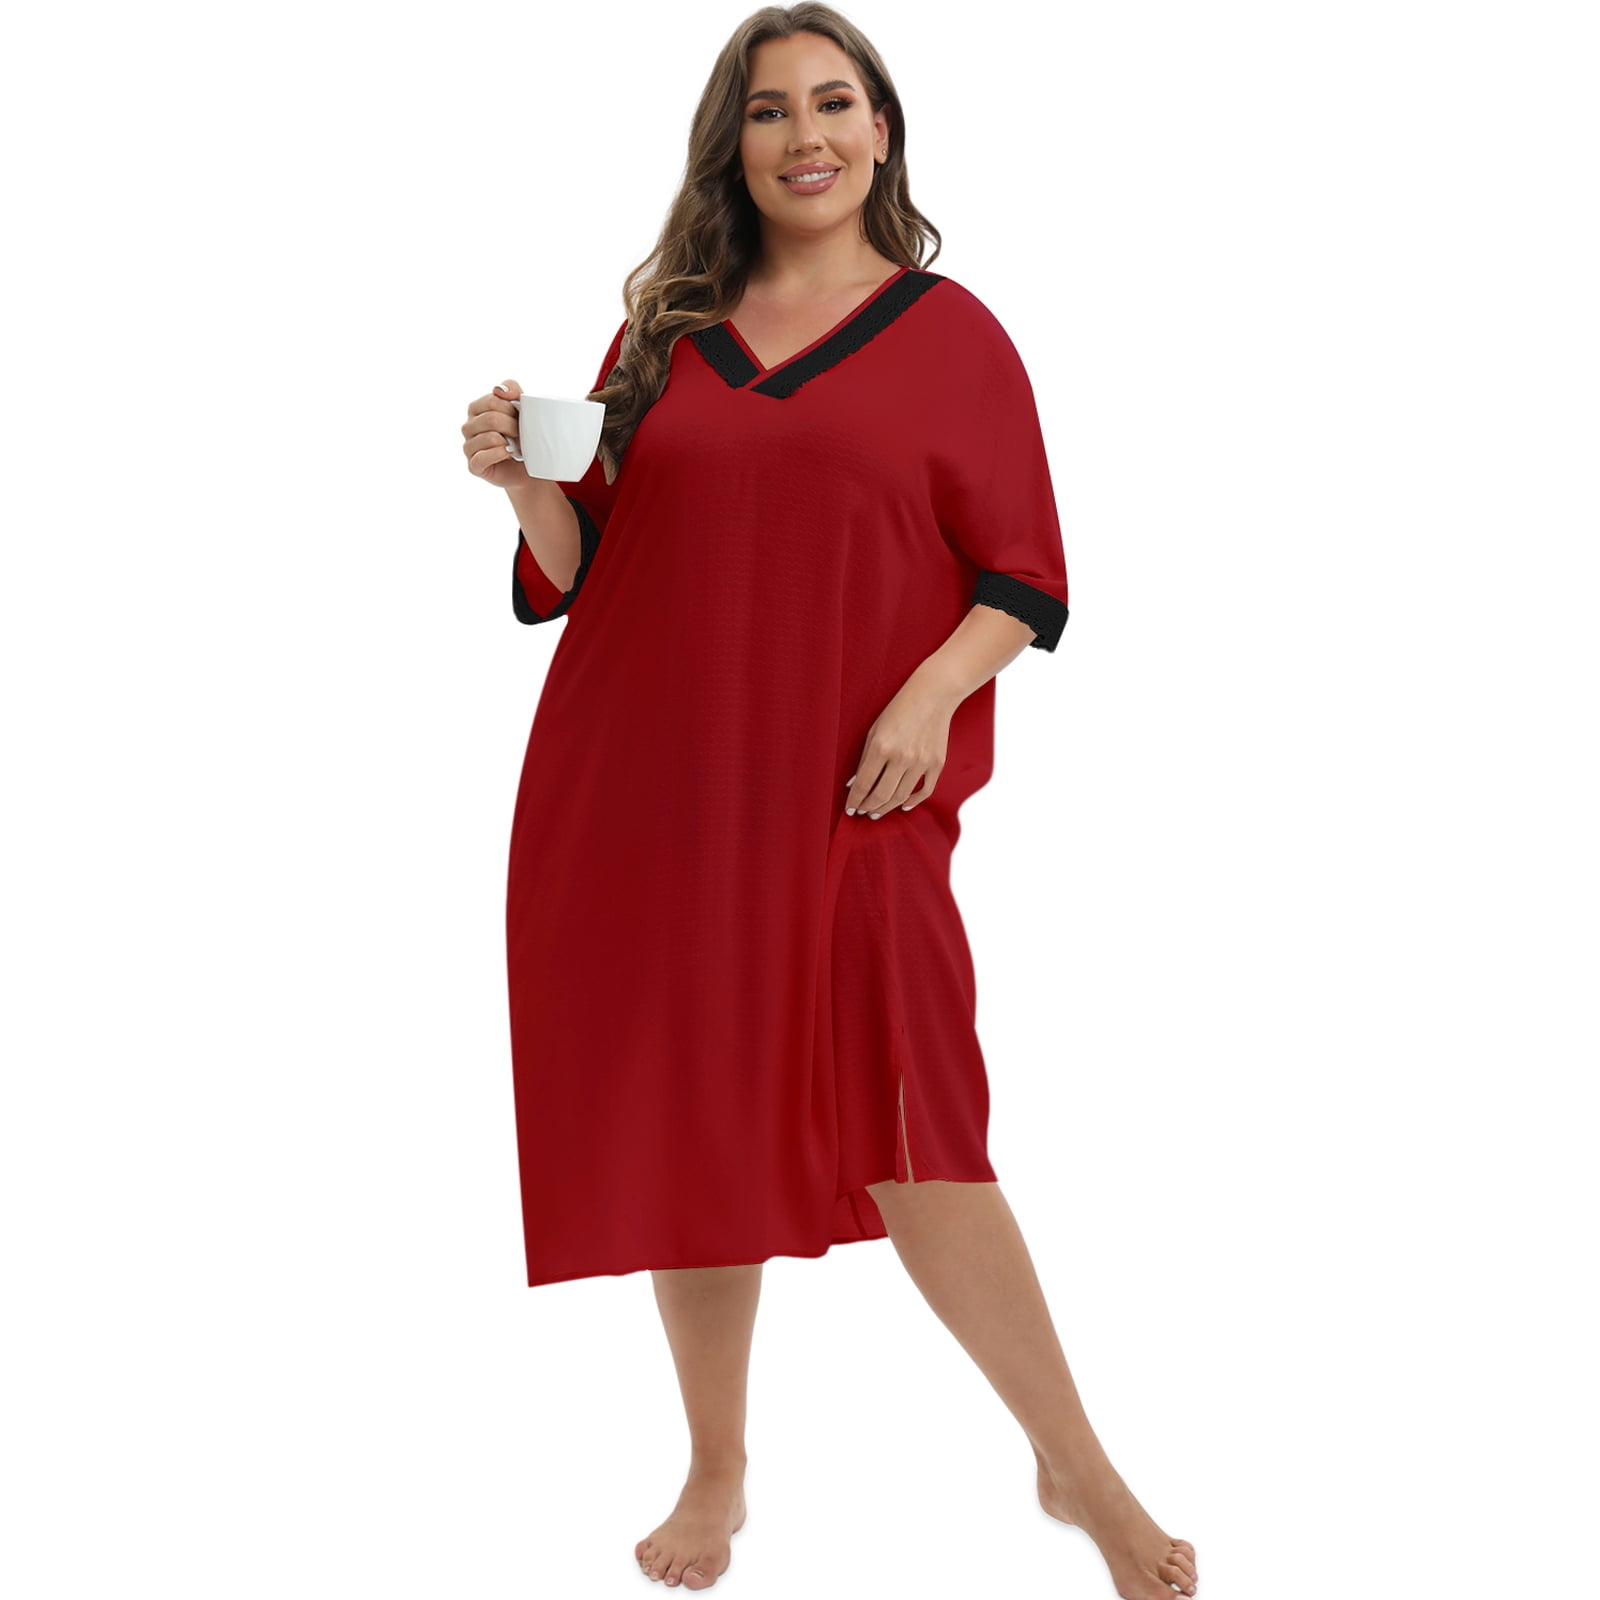 WBQ Plus Size House Dress Womens 3/4 Sleeve Lace V Neck Nightgown ...